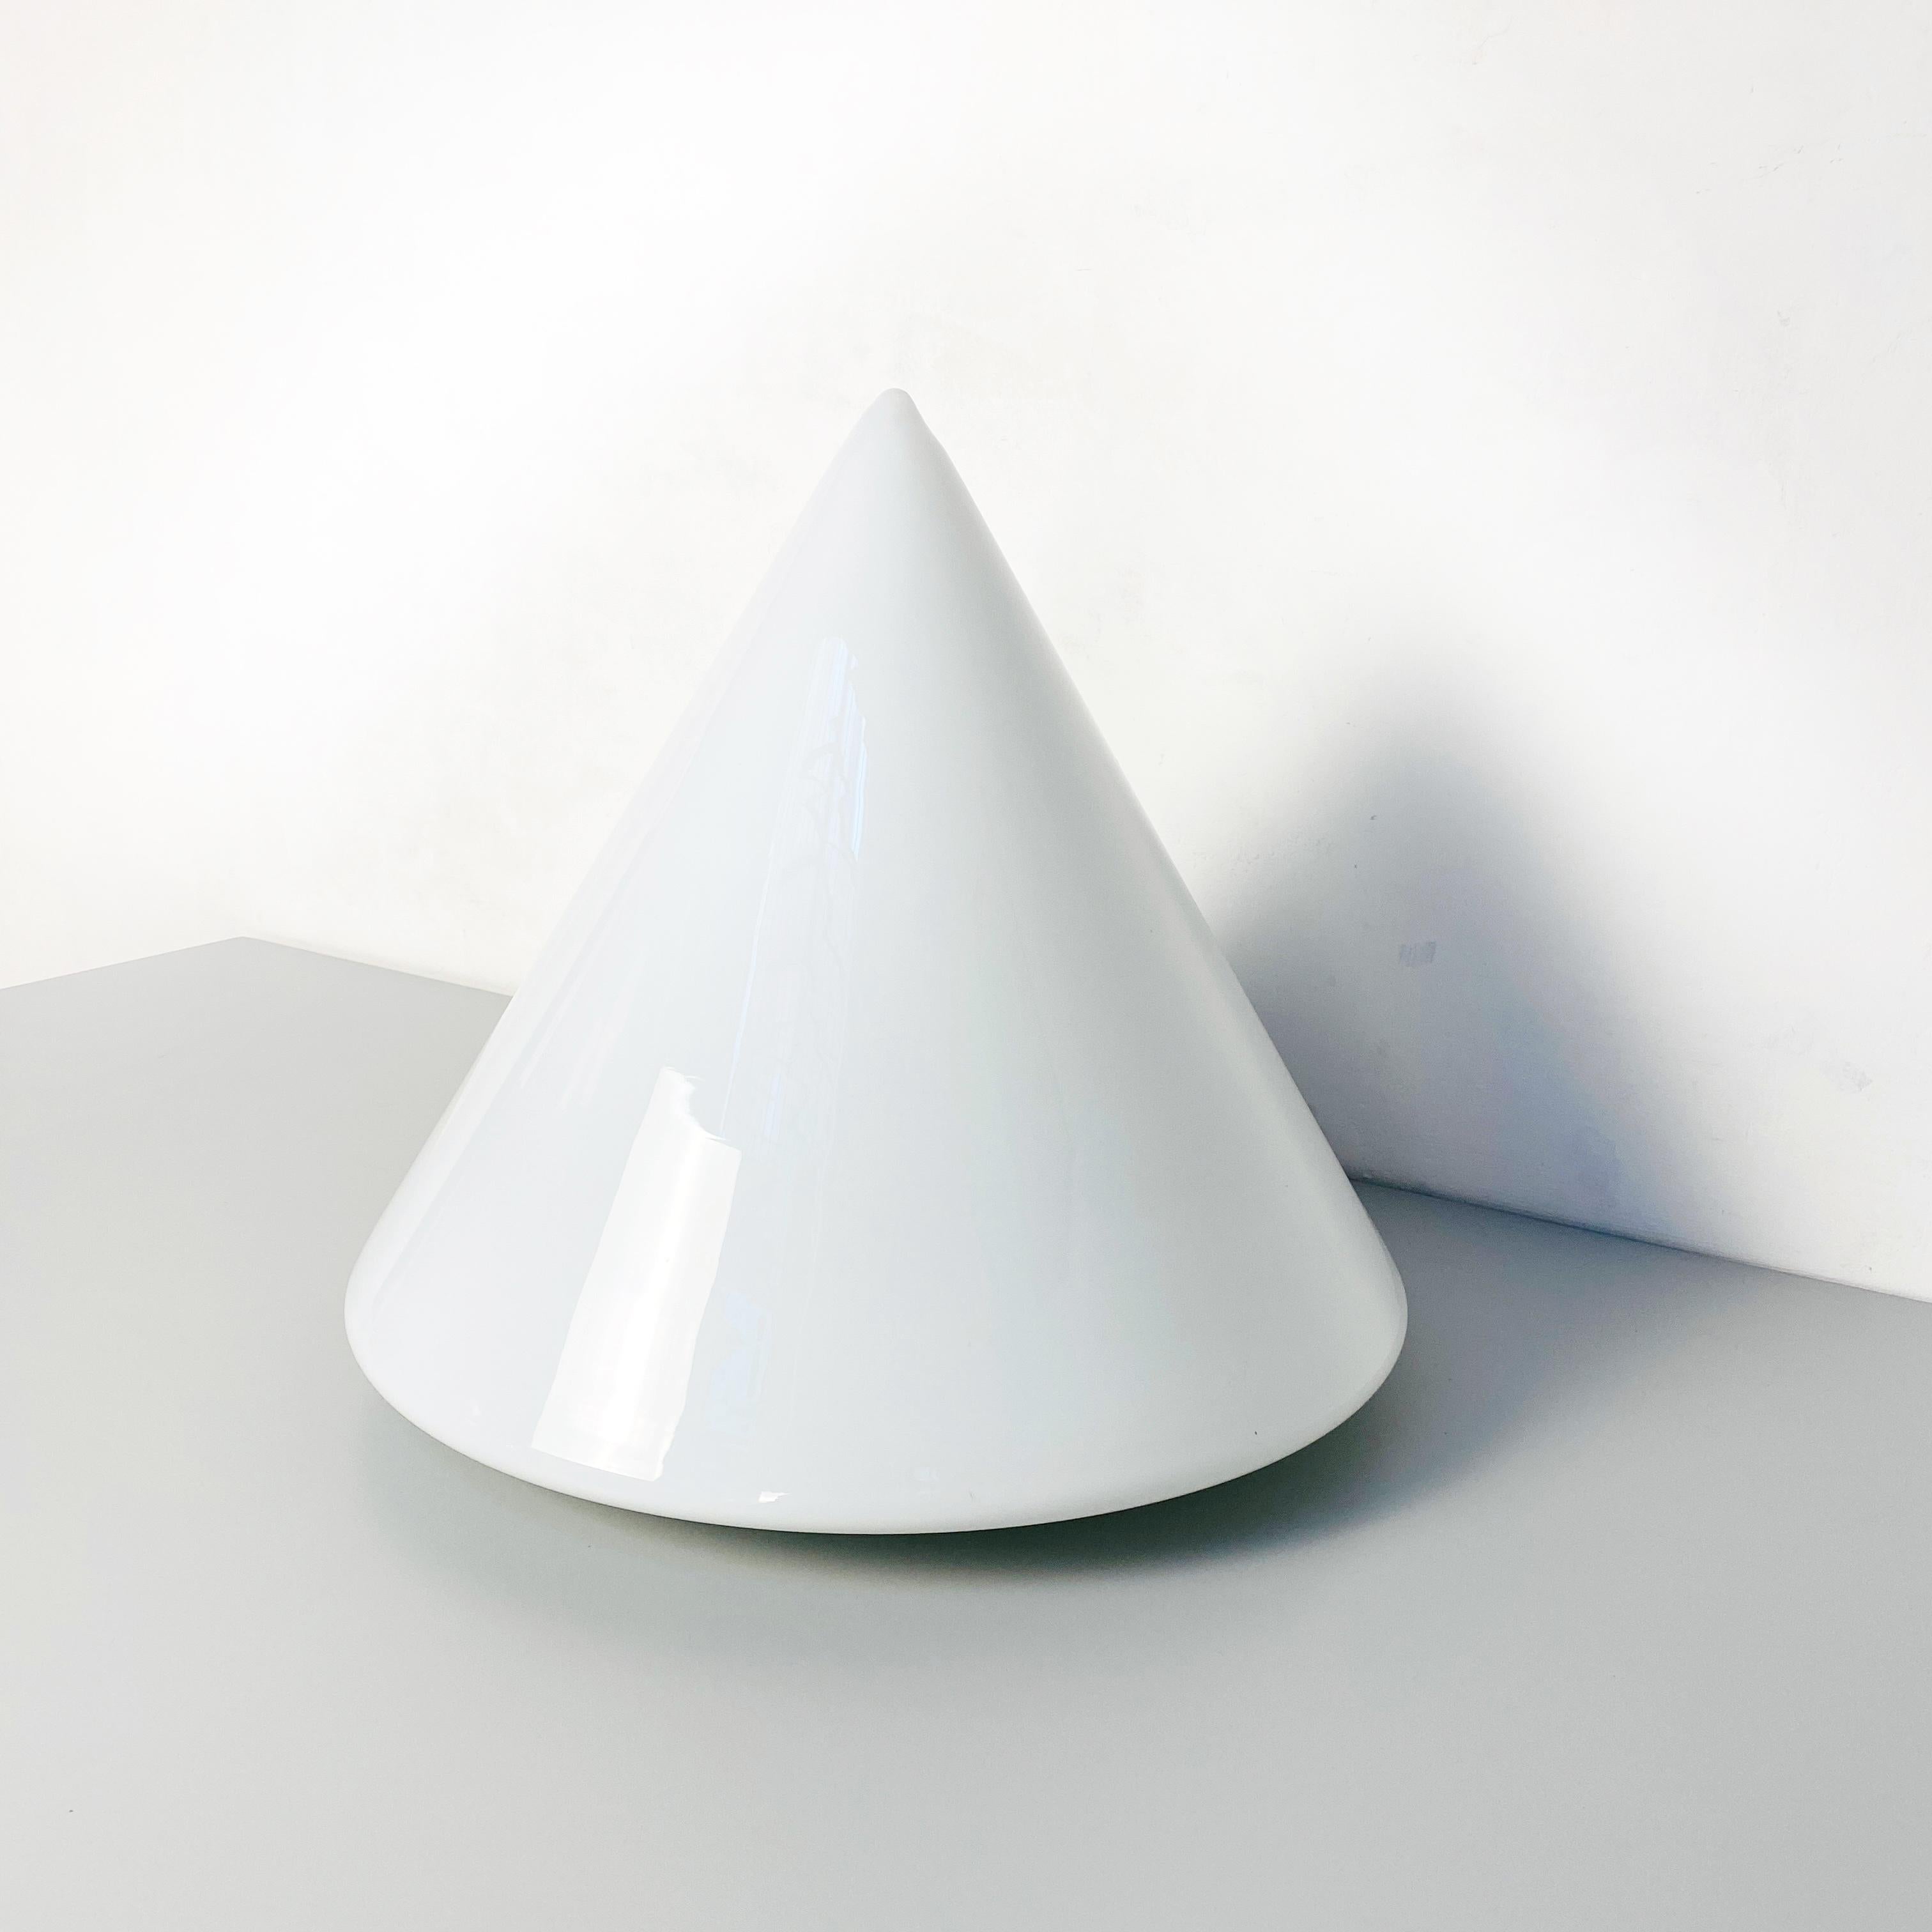 Italian Mid-Century Modern Conical Table Lamp with Double Opal Glass, 1970s For Sale 2